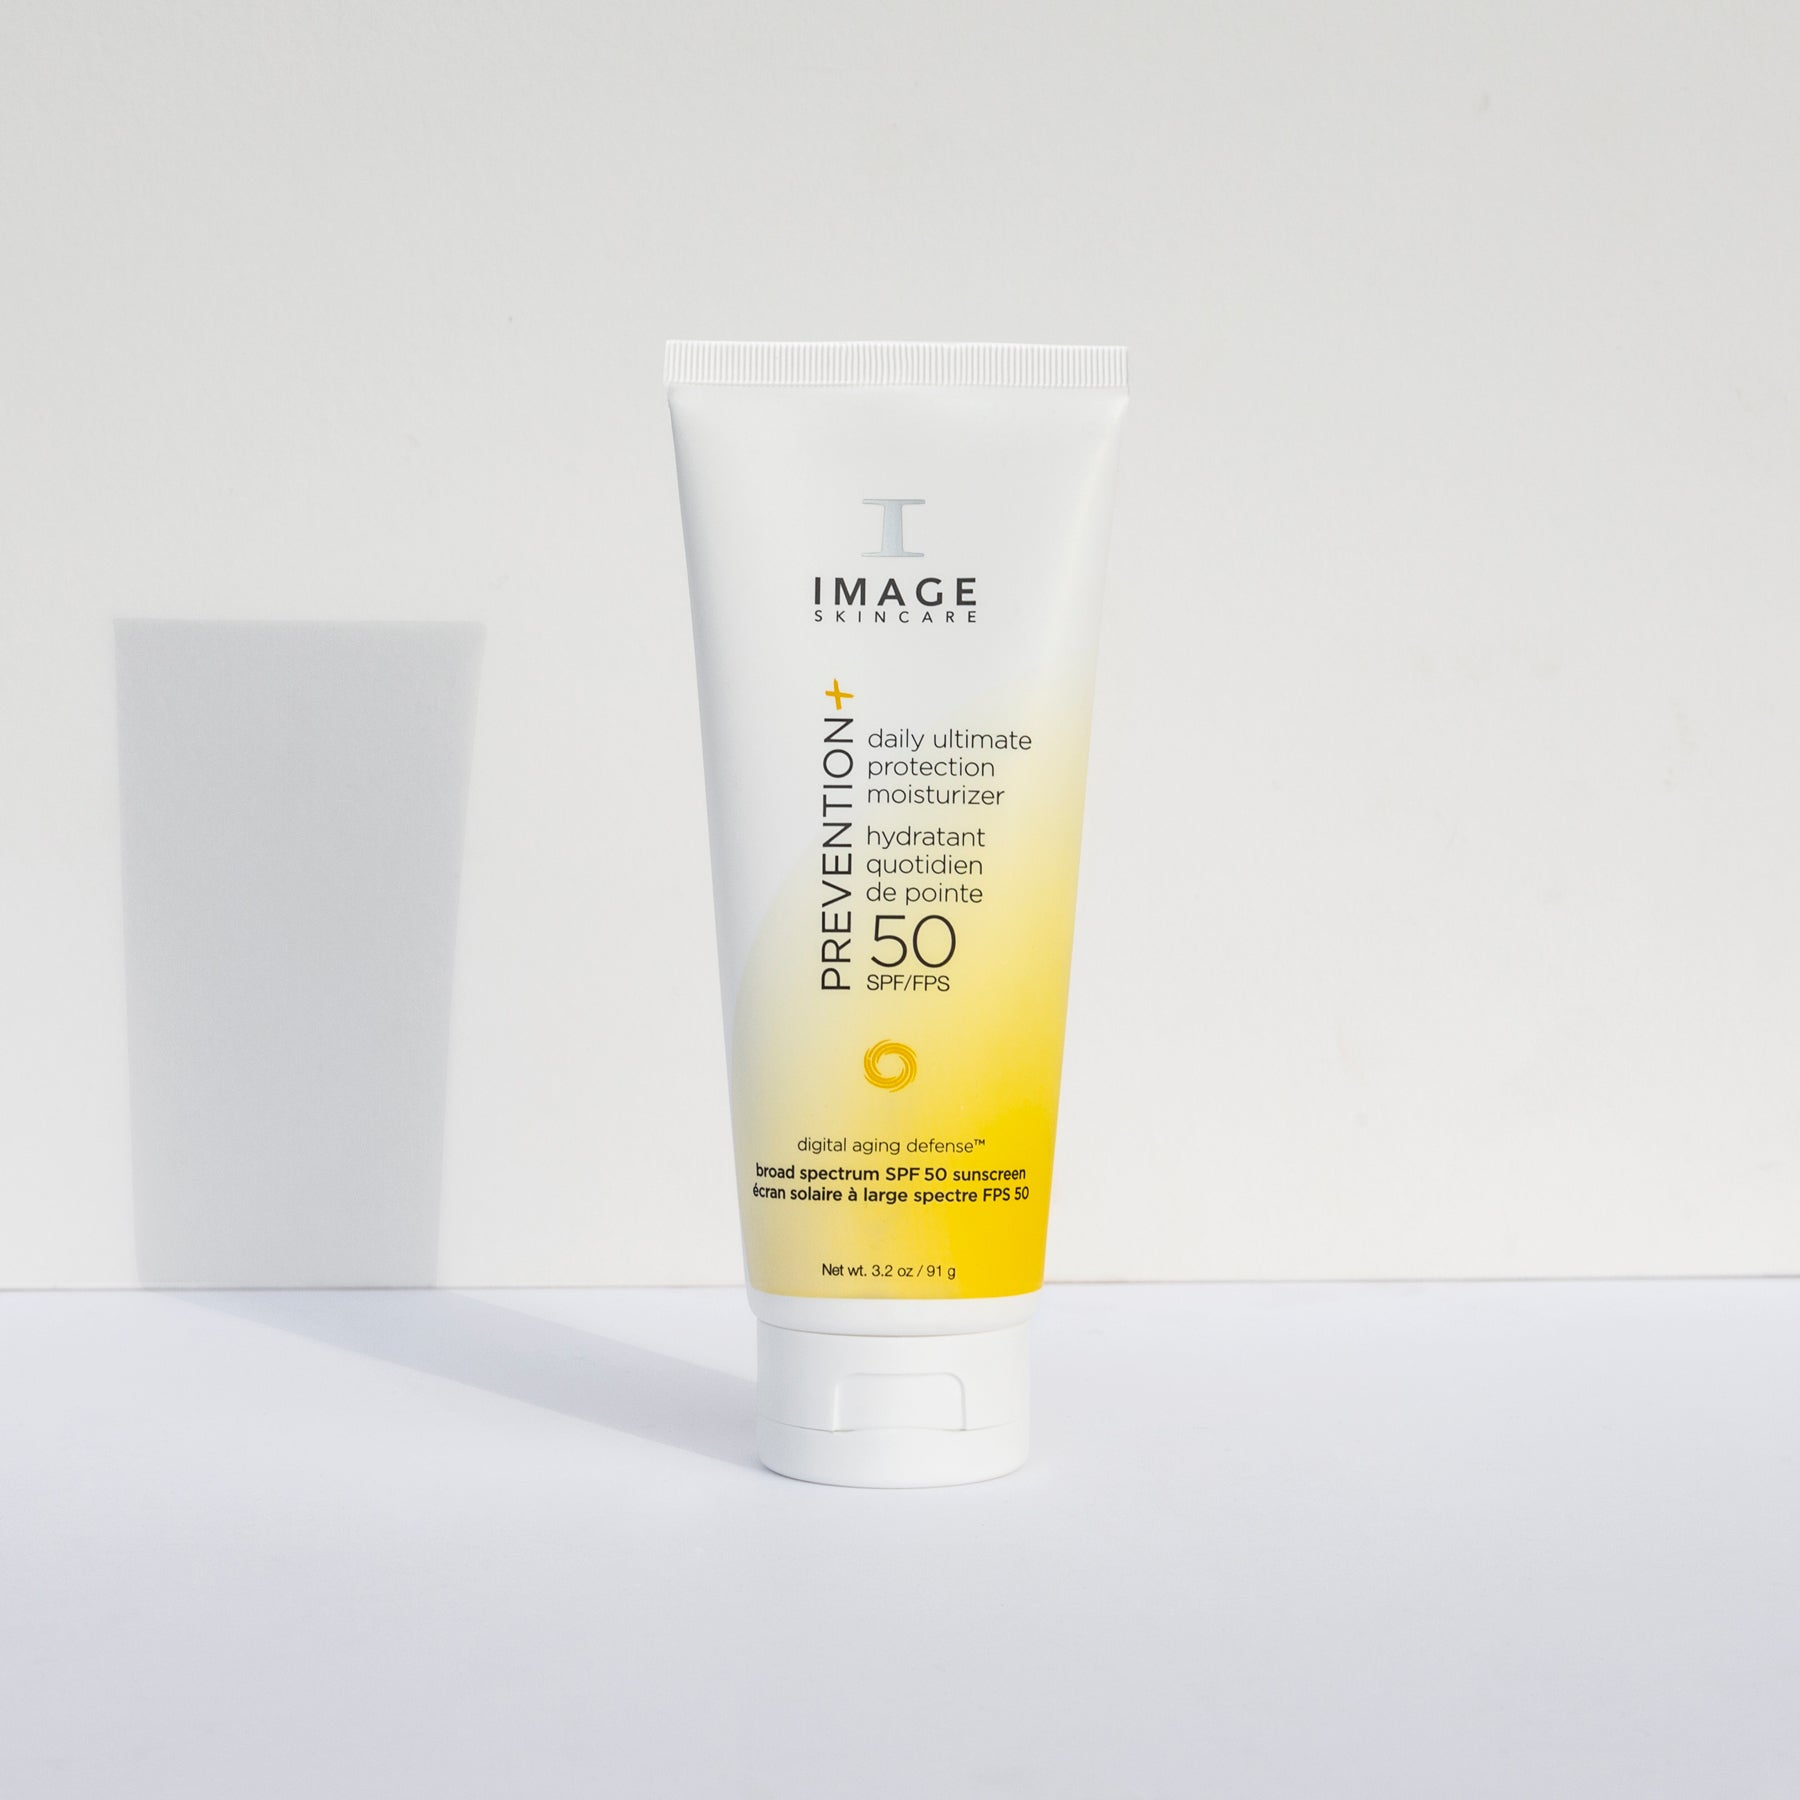 IMAGE PREVENTION+ Daily Ultimate Protection Moisturizer SPF 50